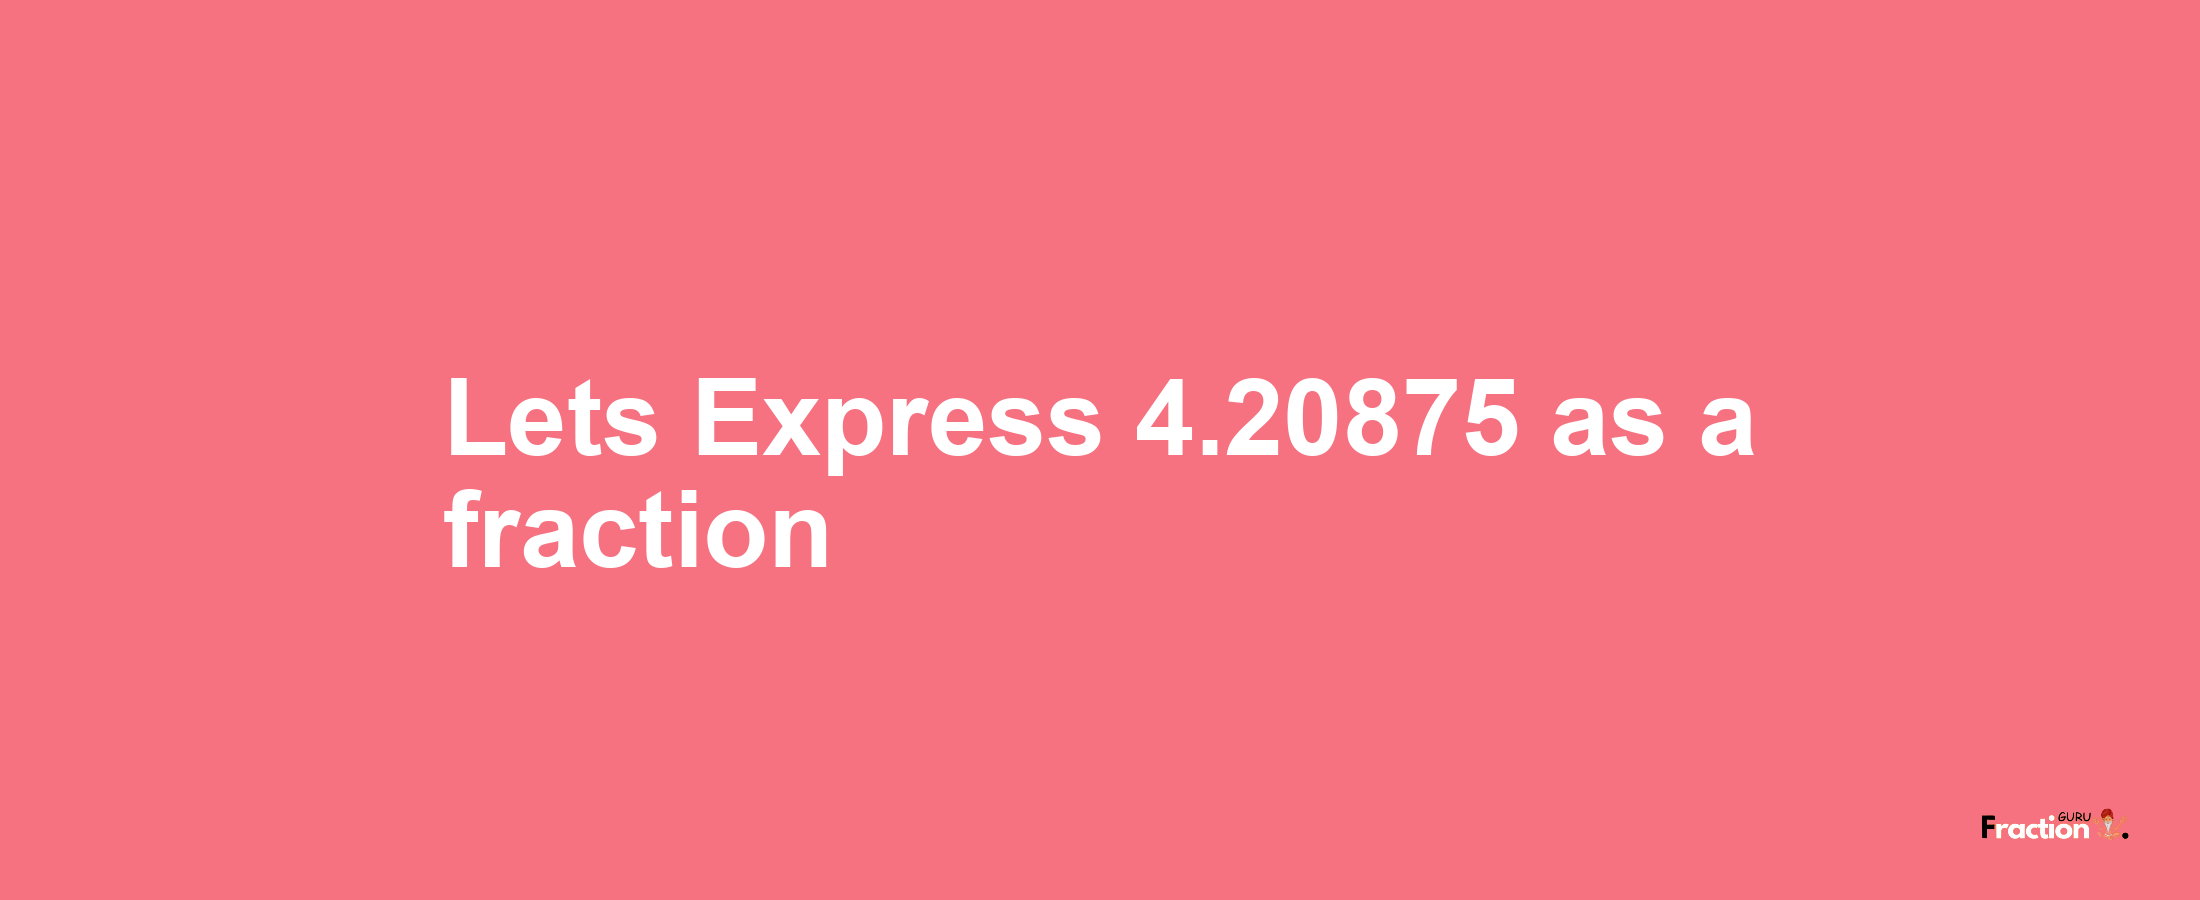 Lets Express 4.20875 as afraction